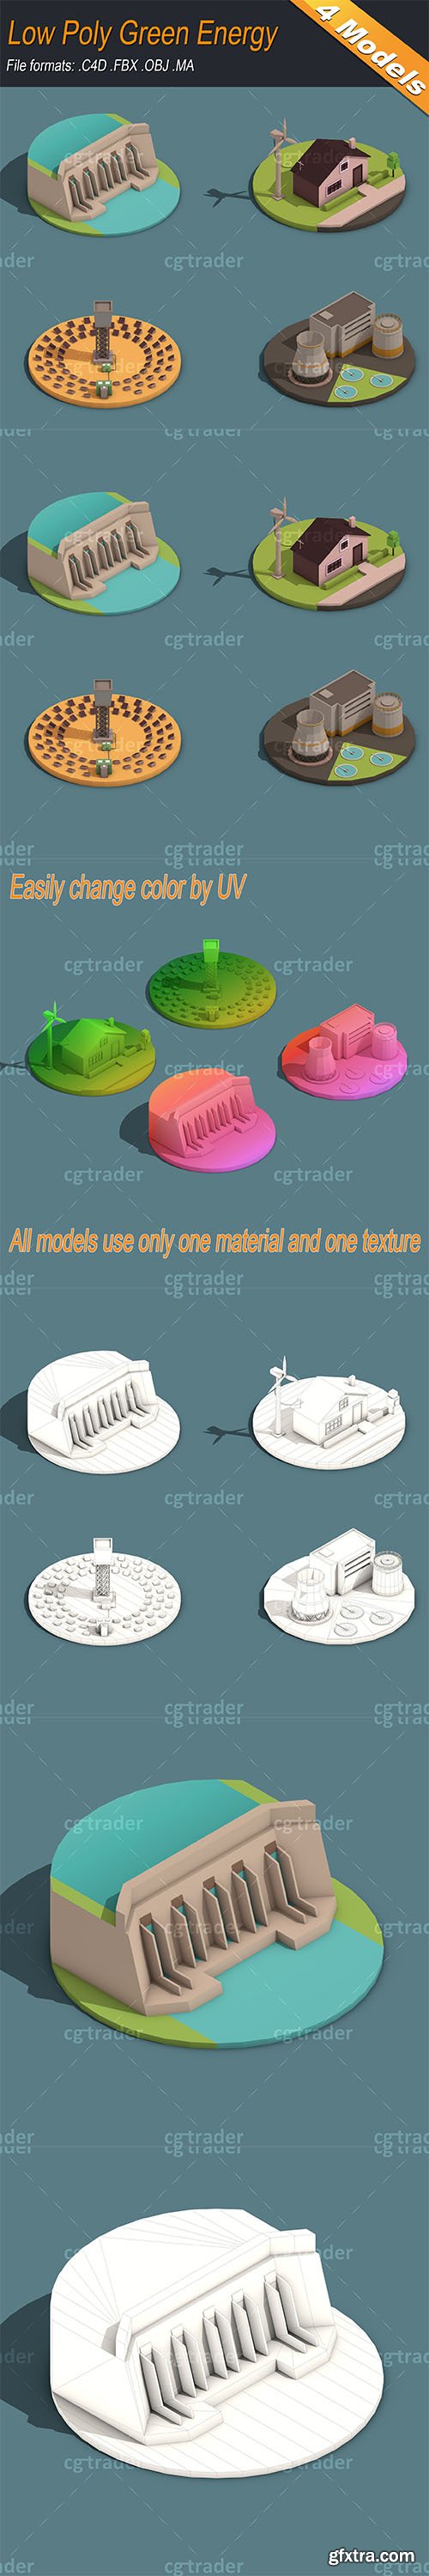 Cgtrader - Low Poly Green Energy Isometric Low-poly 3D model